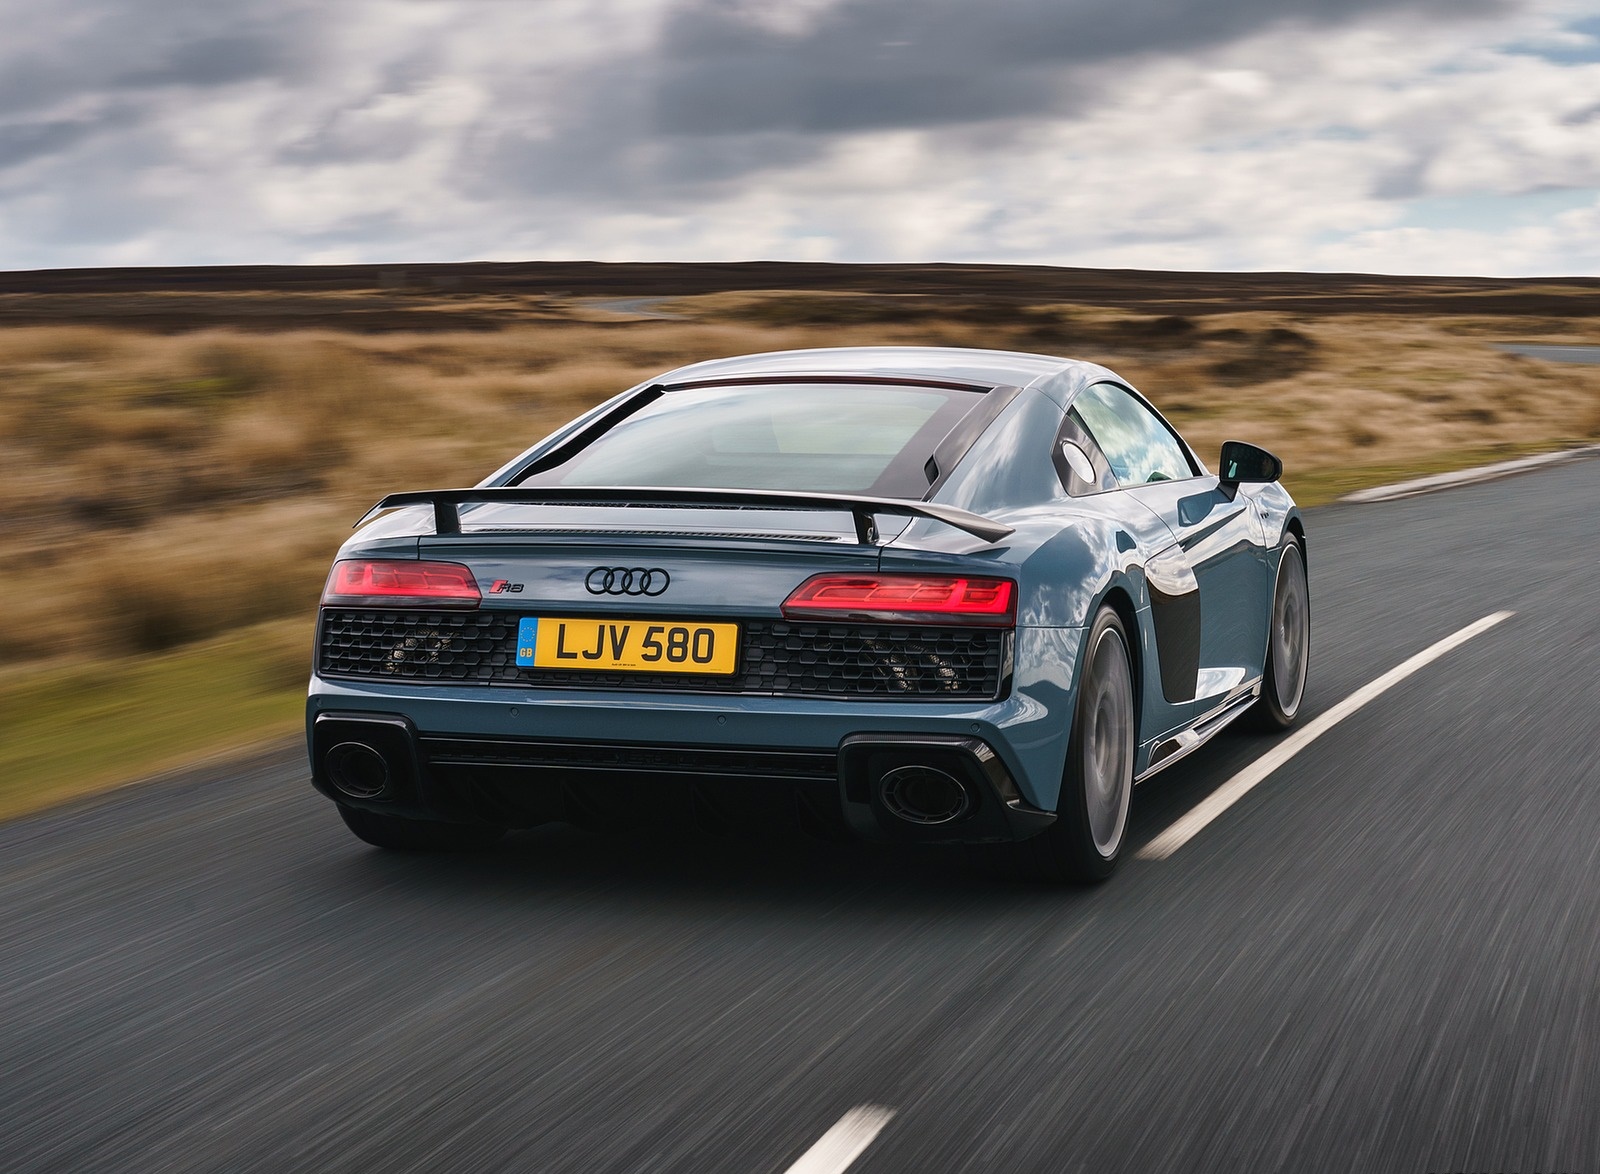 2019 Audi R8 V10 Coupe Performance quattro (UK-Spec) Rear Wallpapers #101 of 199